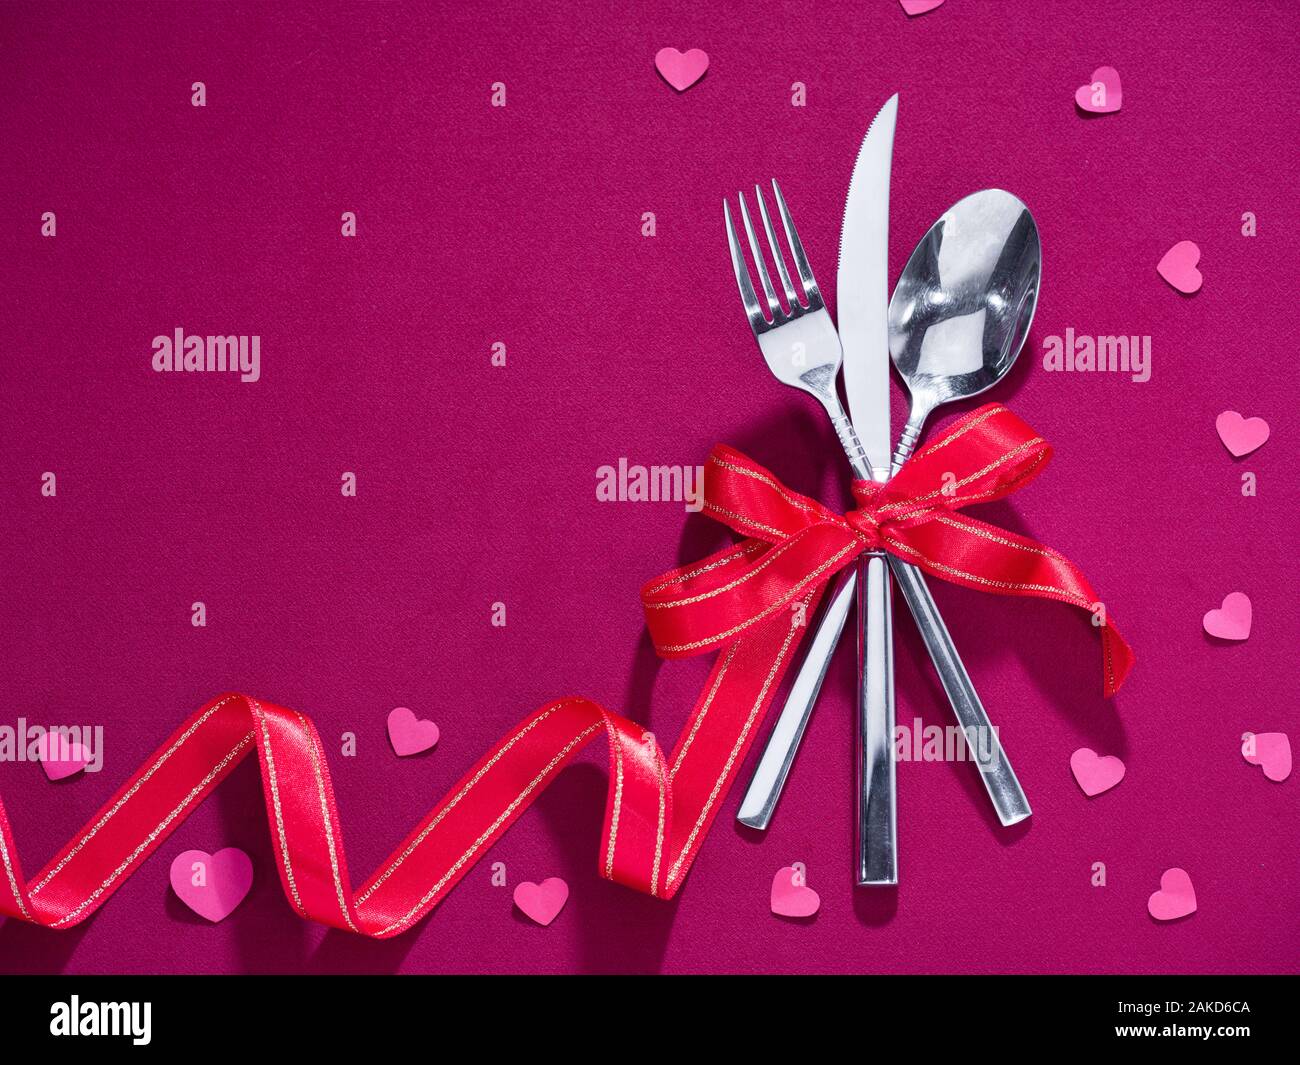 Fork, knife and spoon tied with red ribbon on pink cloth. Celebration food concept Stock Photo